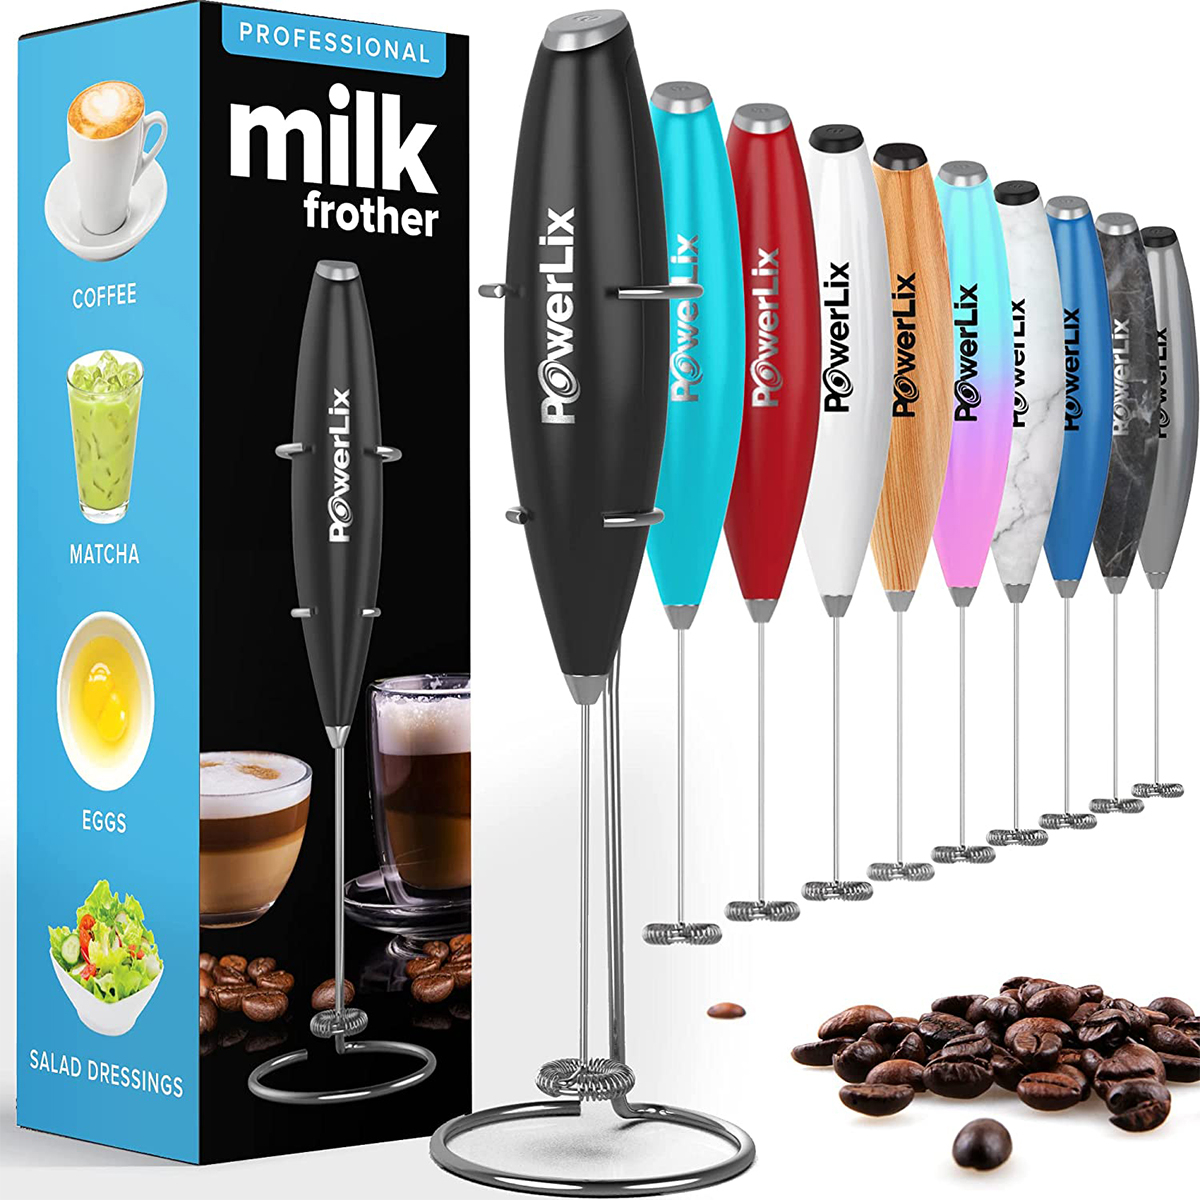 https://akns-images.eonline.com/eol_images/Entire_Site/2022911/rs_1200x1200-221011121123-Amazon-Prime-Day-Frother.jpg?fit=around%7C1080:540&output-quality=90&crop=1080:540;center,top